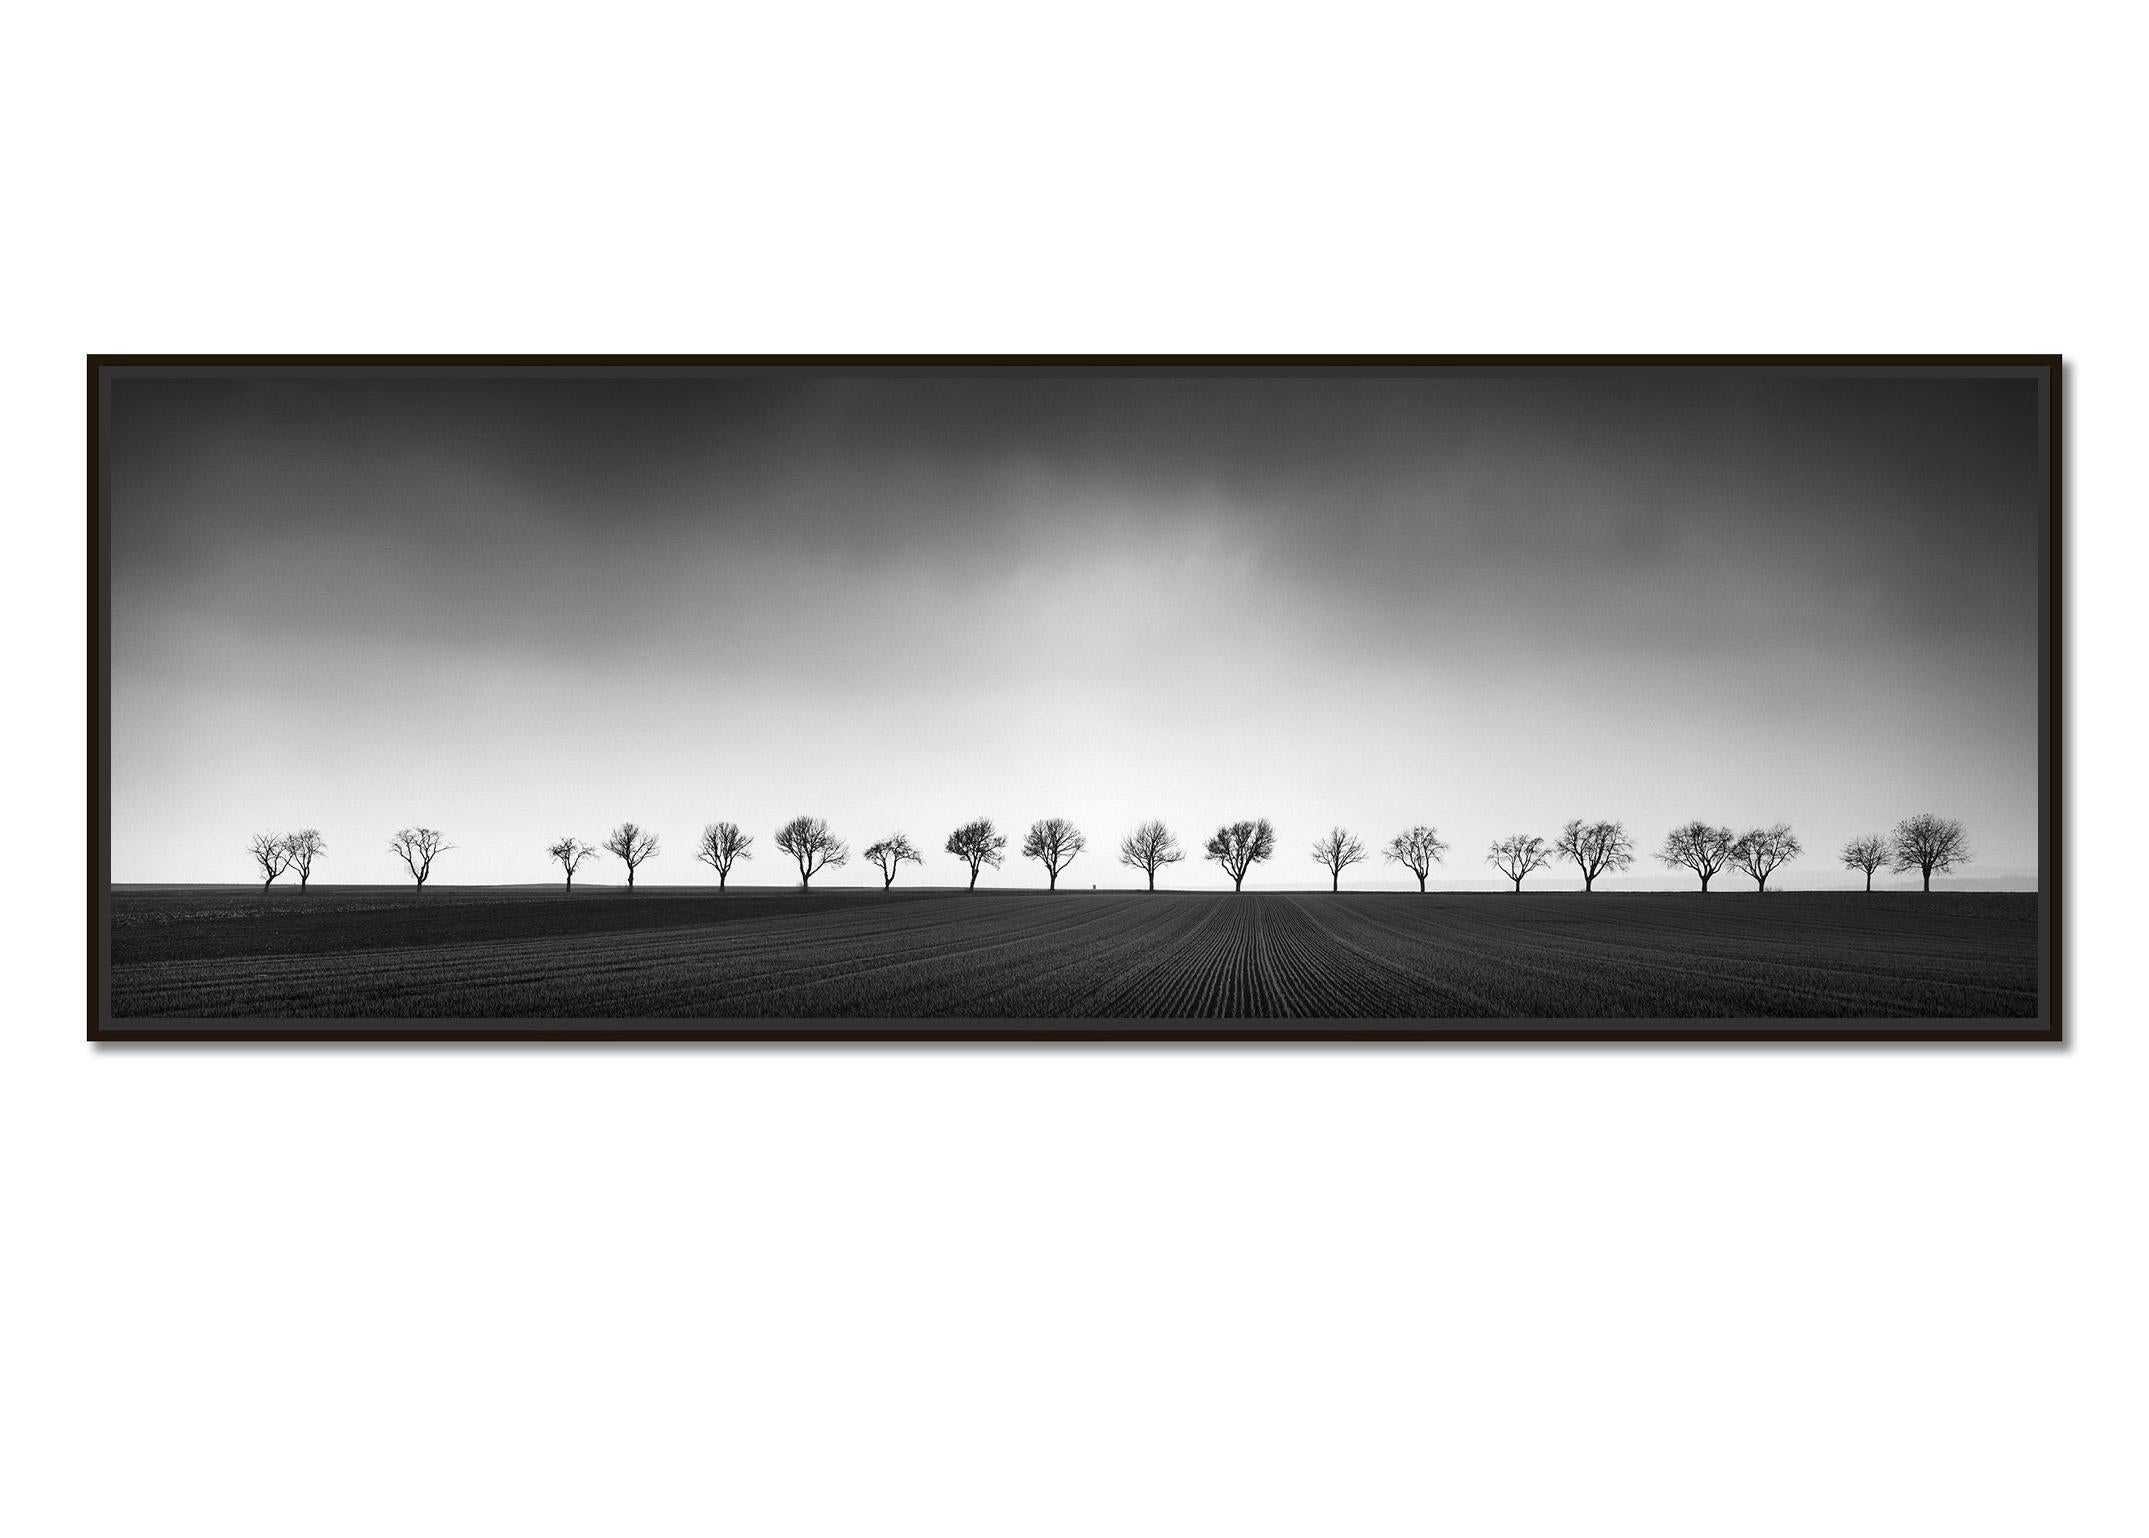 Twenty Cherry Trees, Avenue, Austria, black and white art photography landscapes - Photograph by Gerald Berghammer